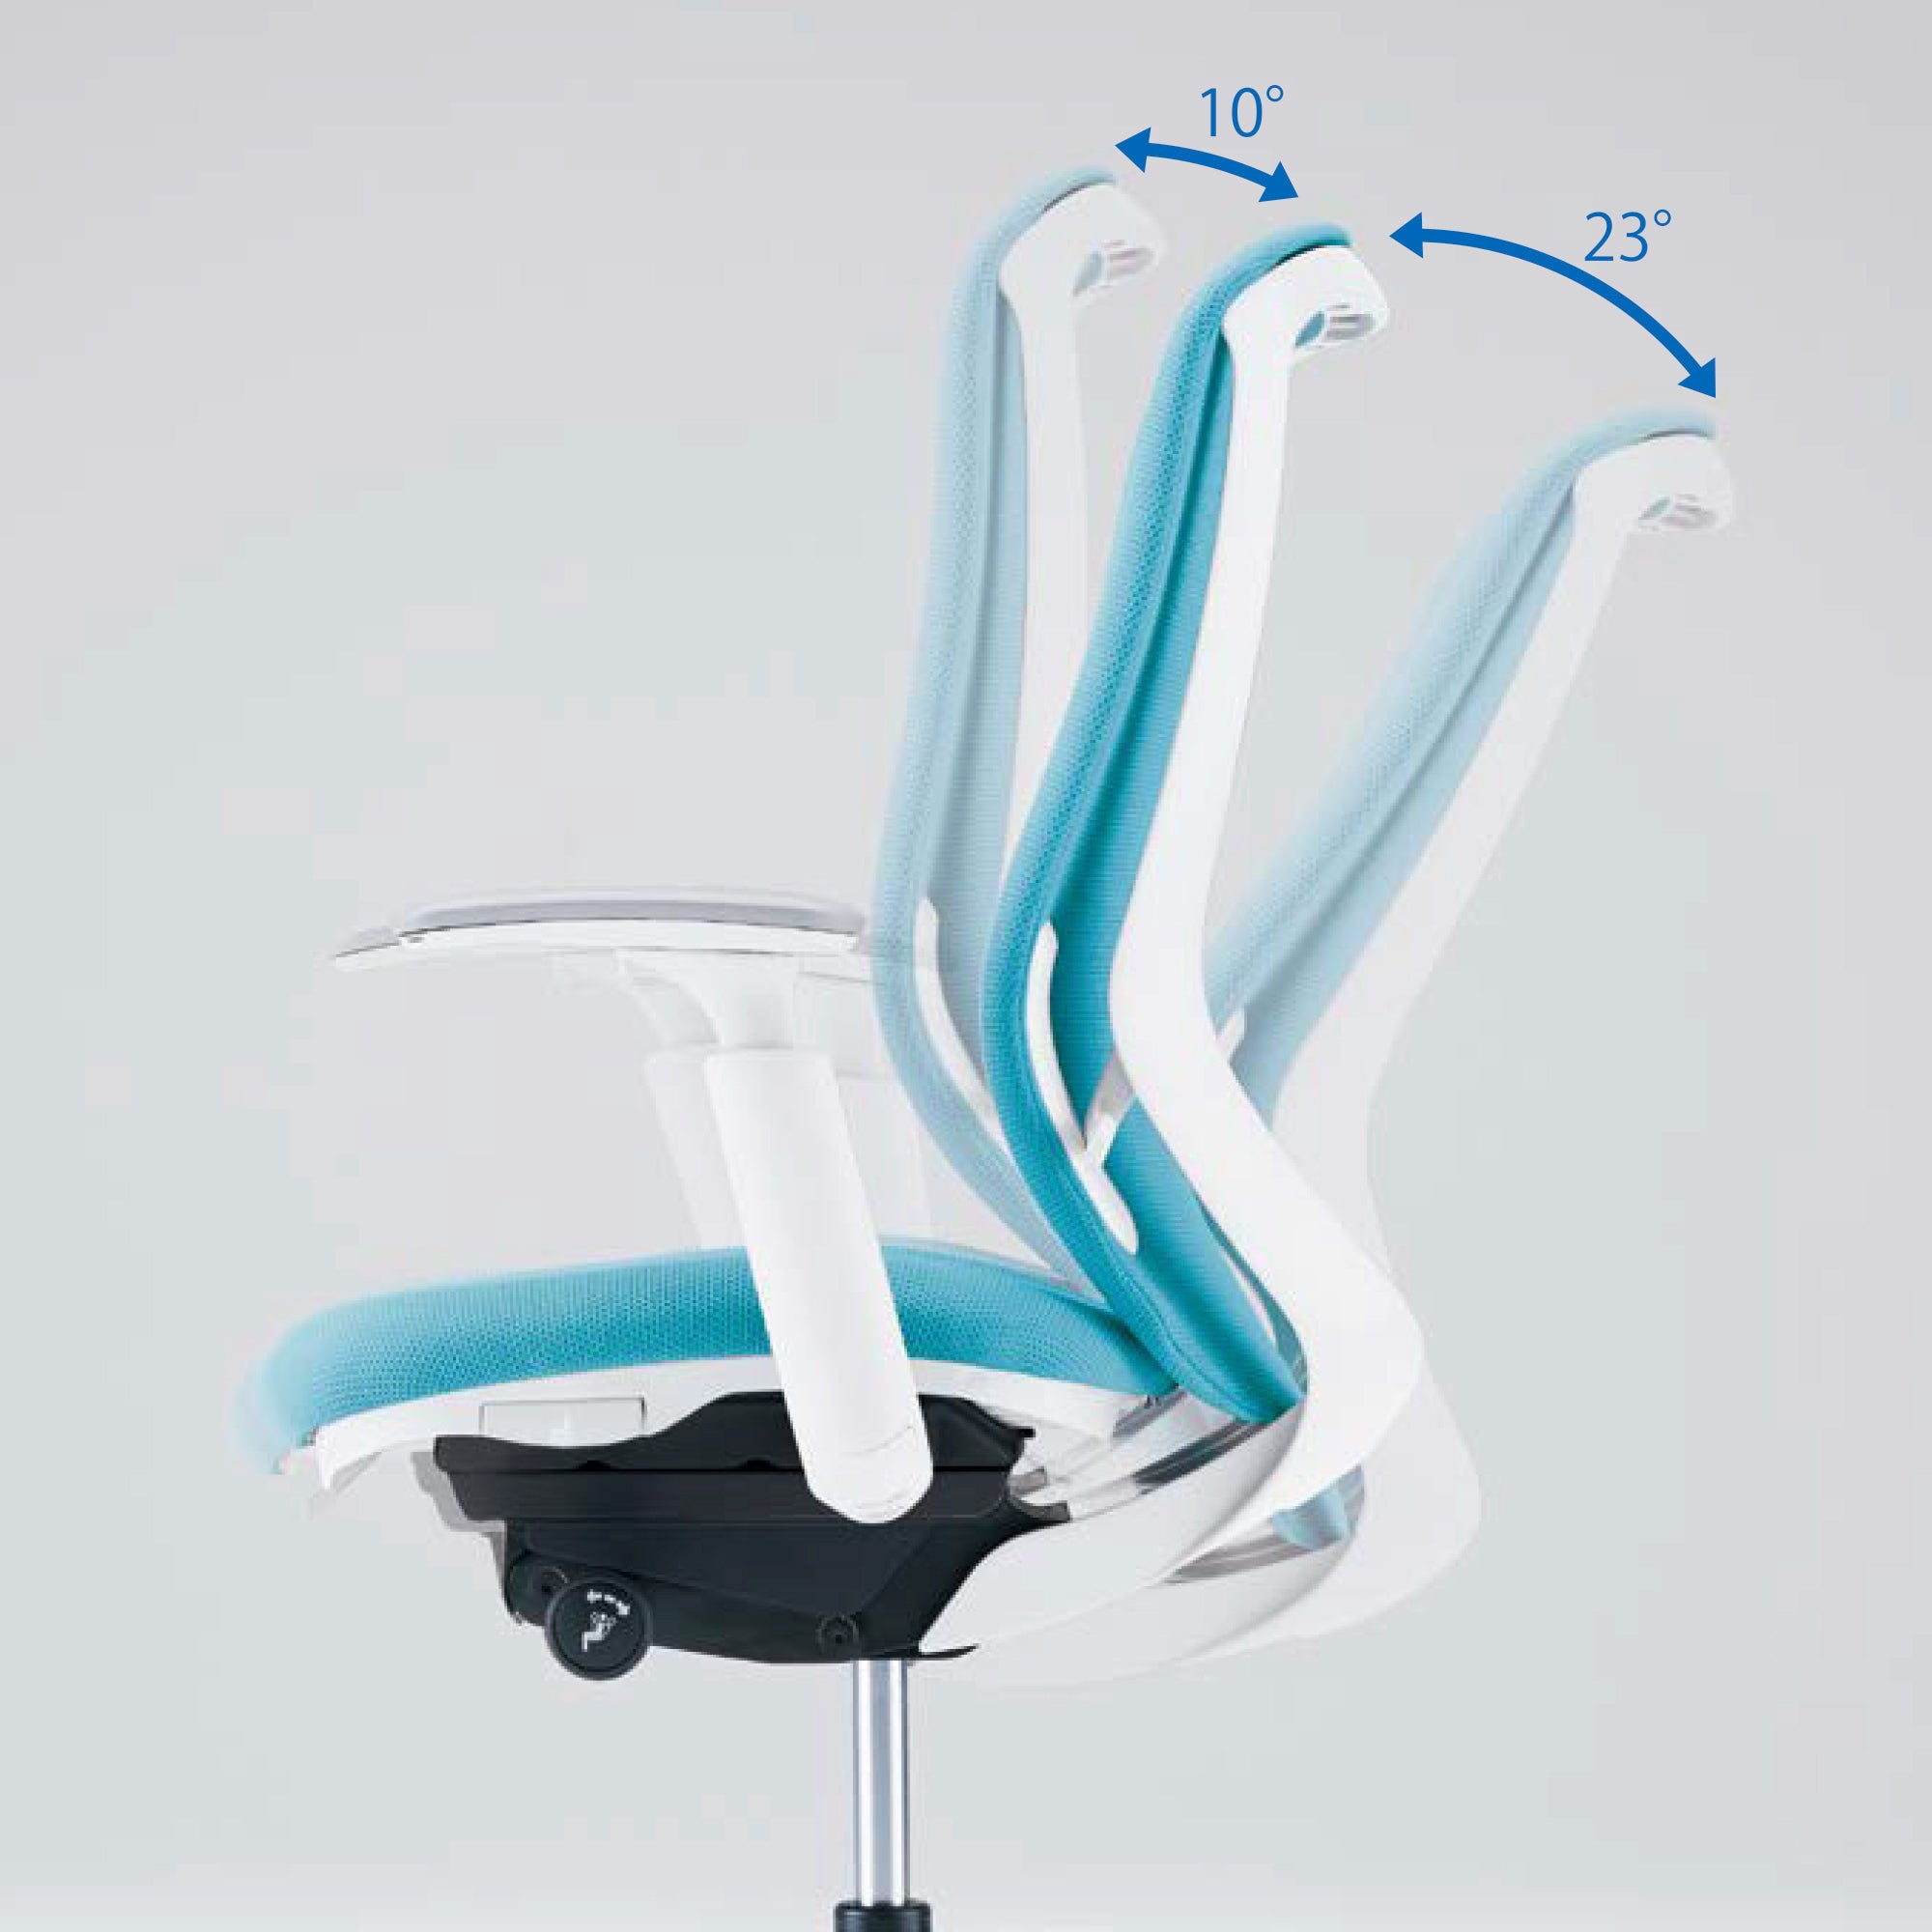 An ergonomic kneeling chair with angled seat